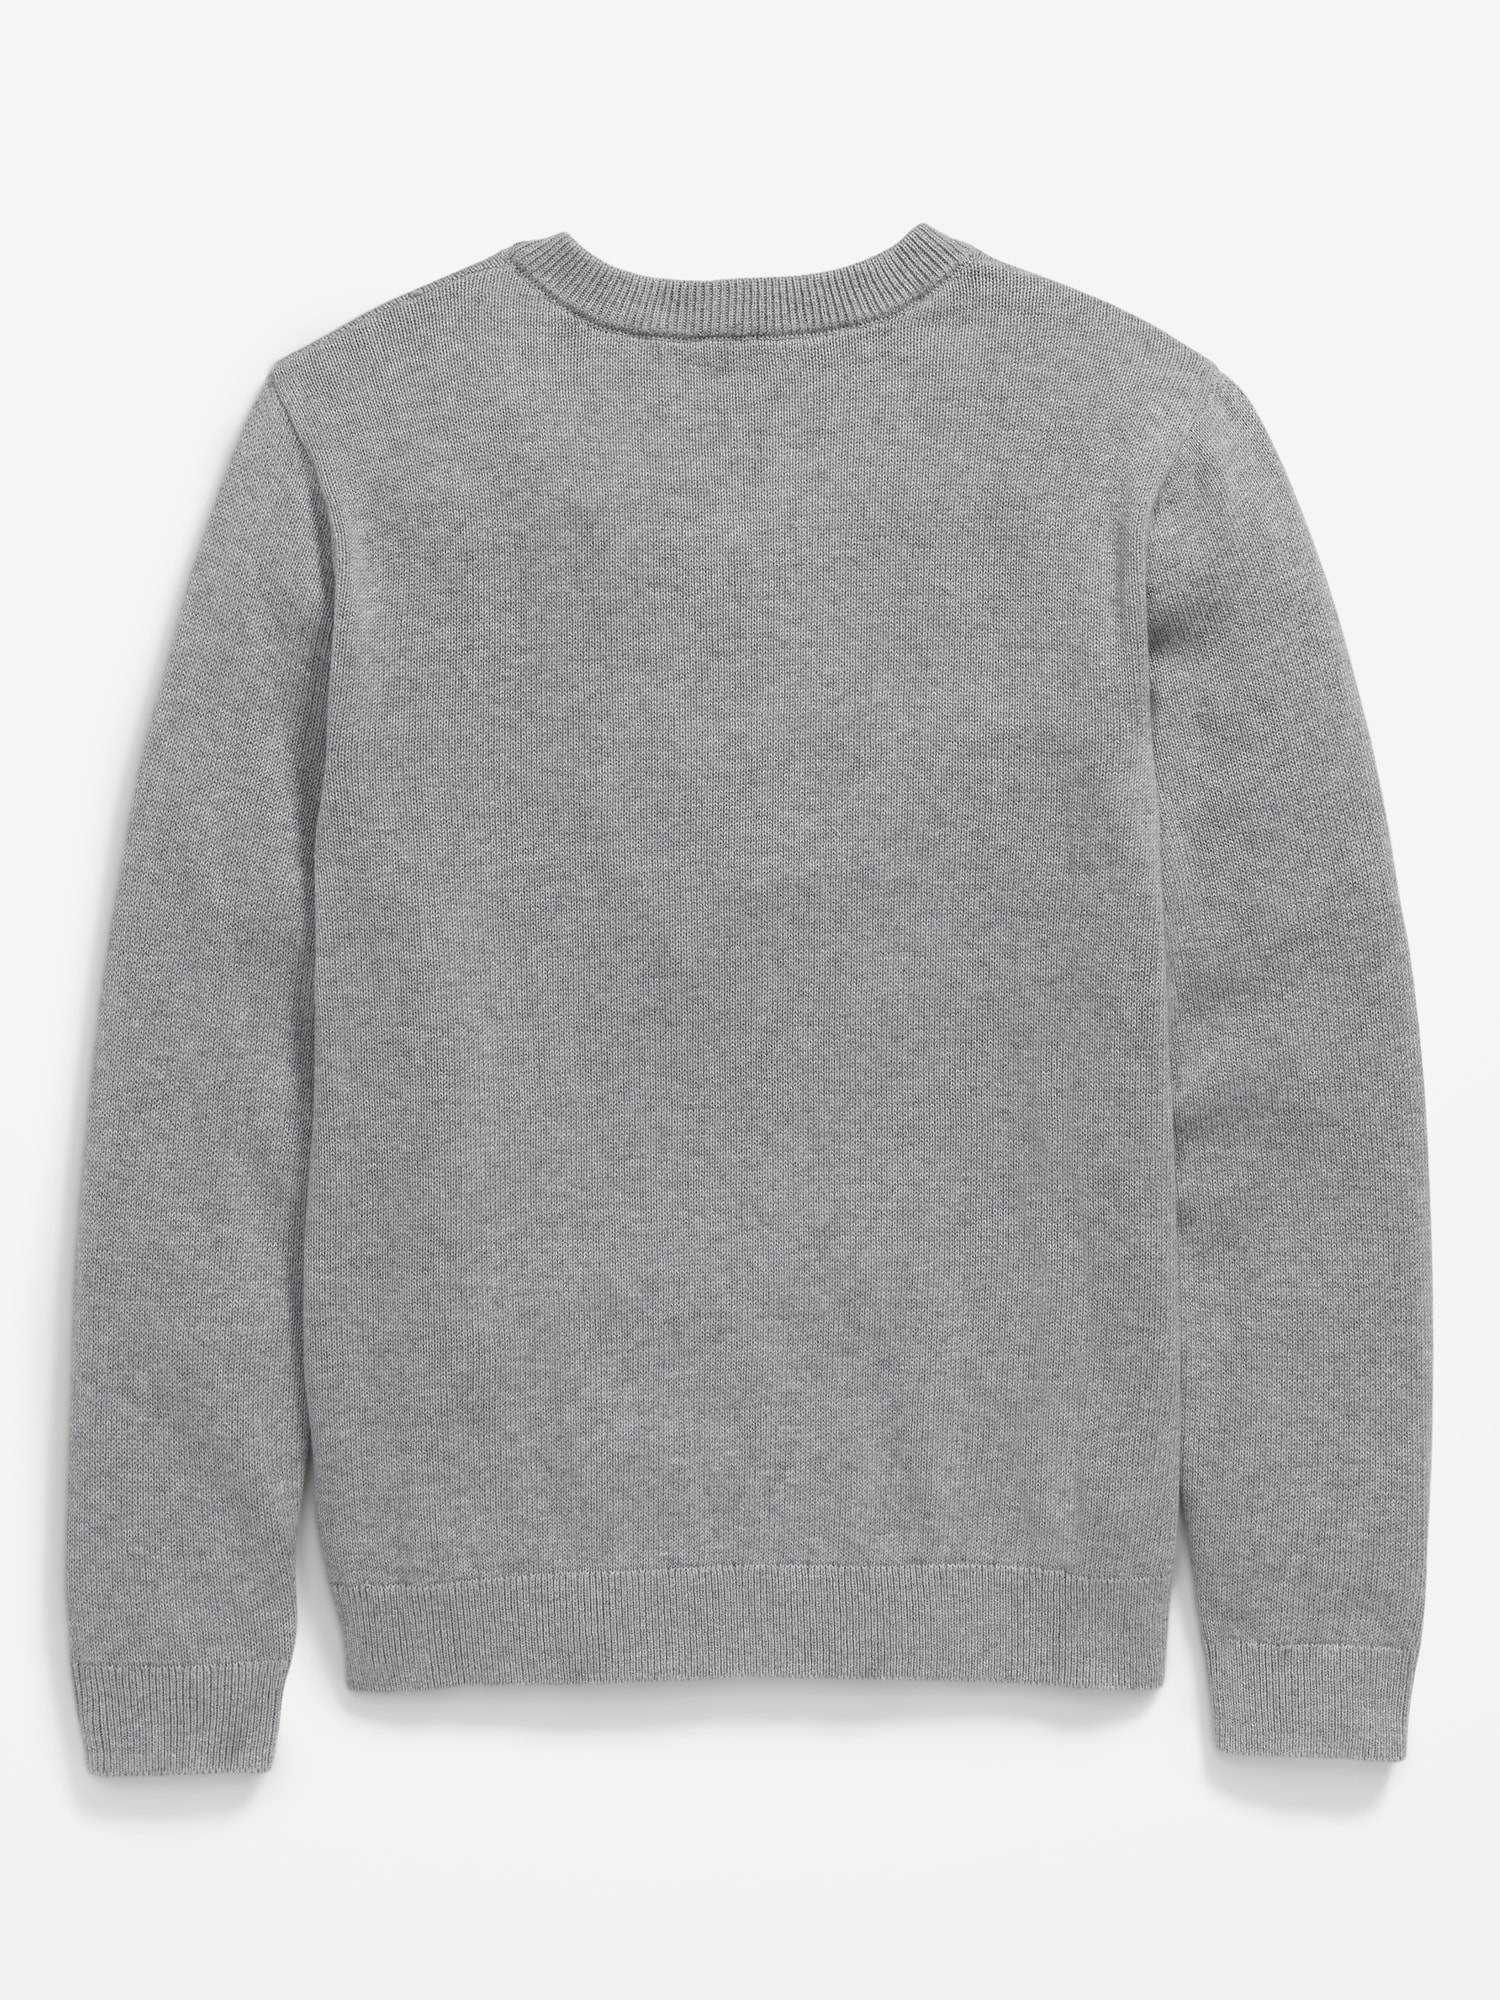 Long-Sleeve Solid V-Neck Sweater for Boys | Old Navy